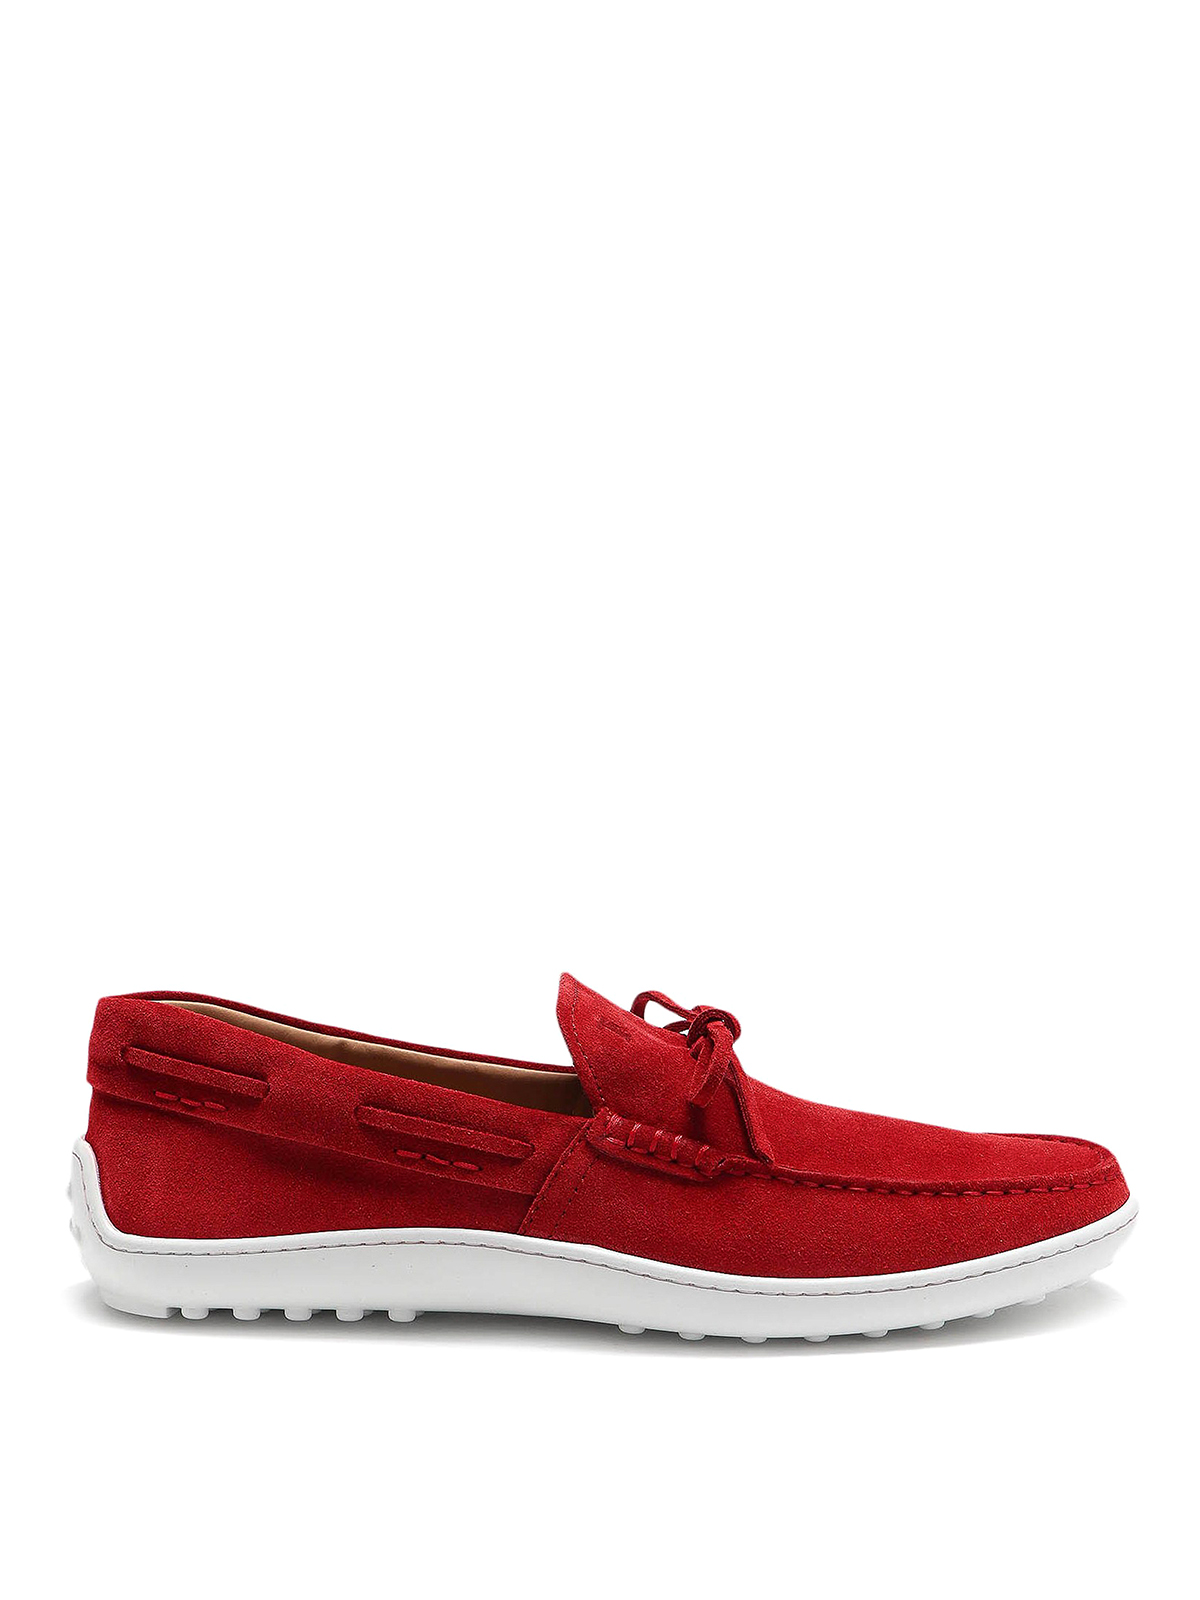 TOD'S GOMMINO BRIGHT RED SUEDE LOAFERS